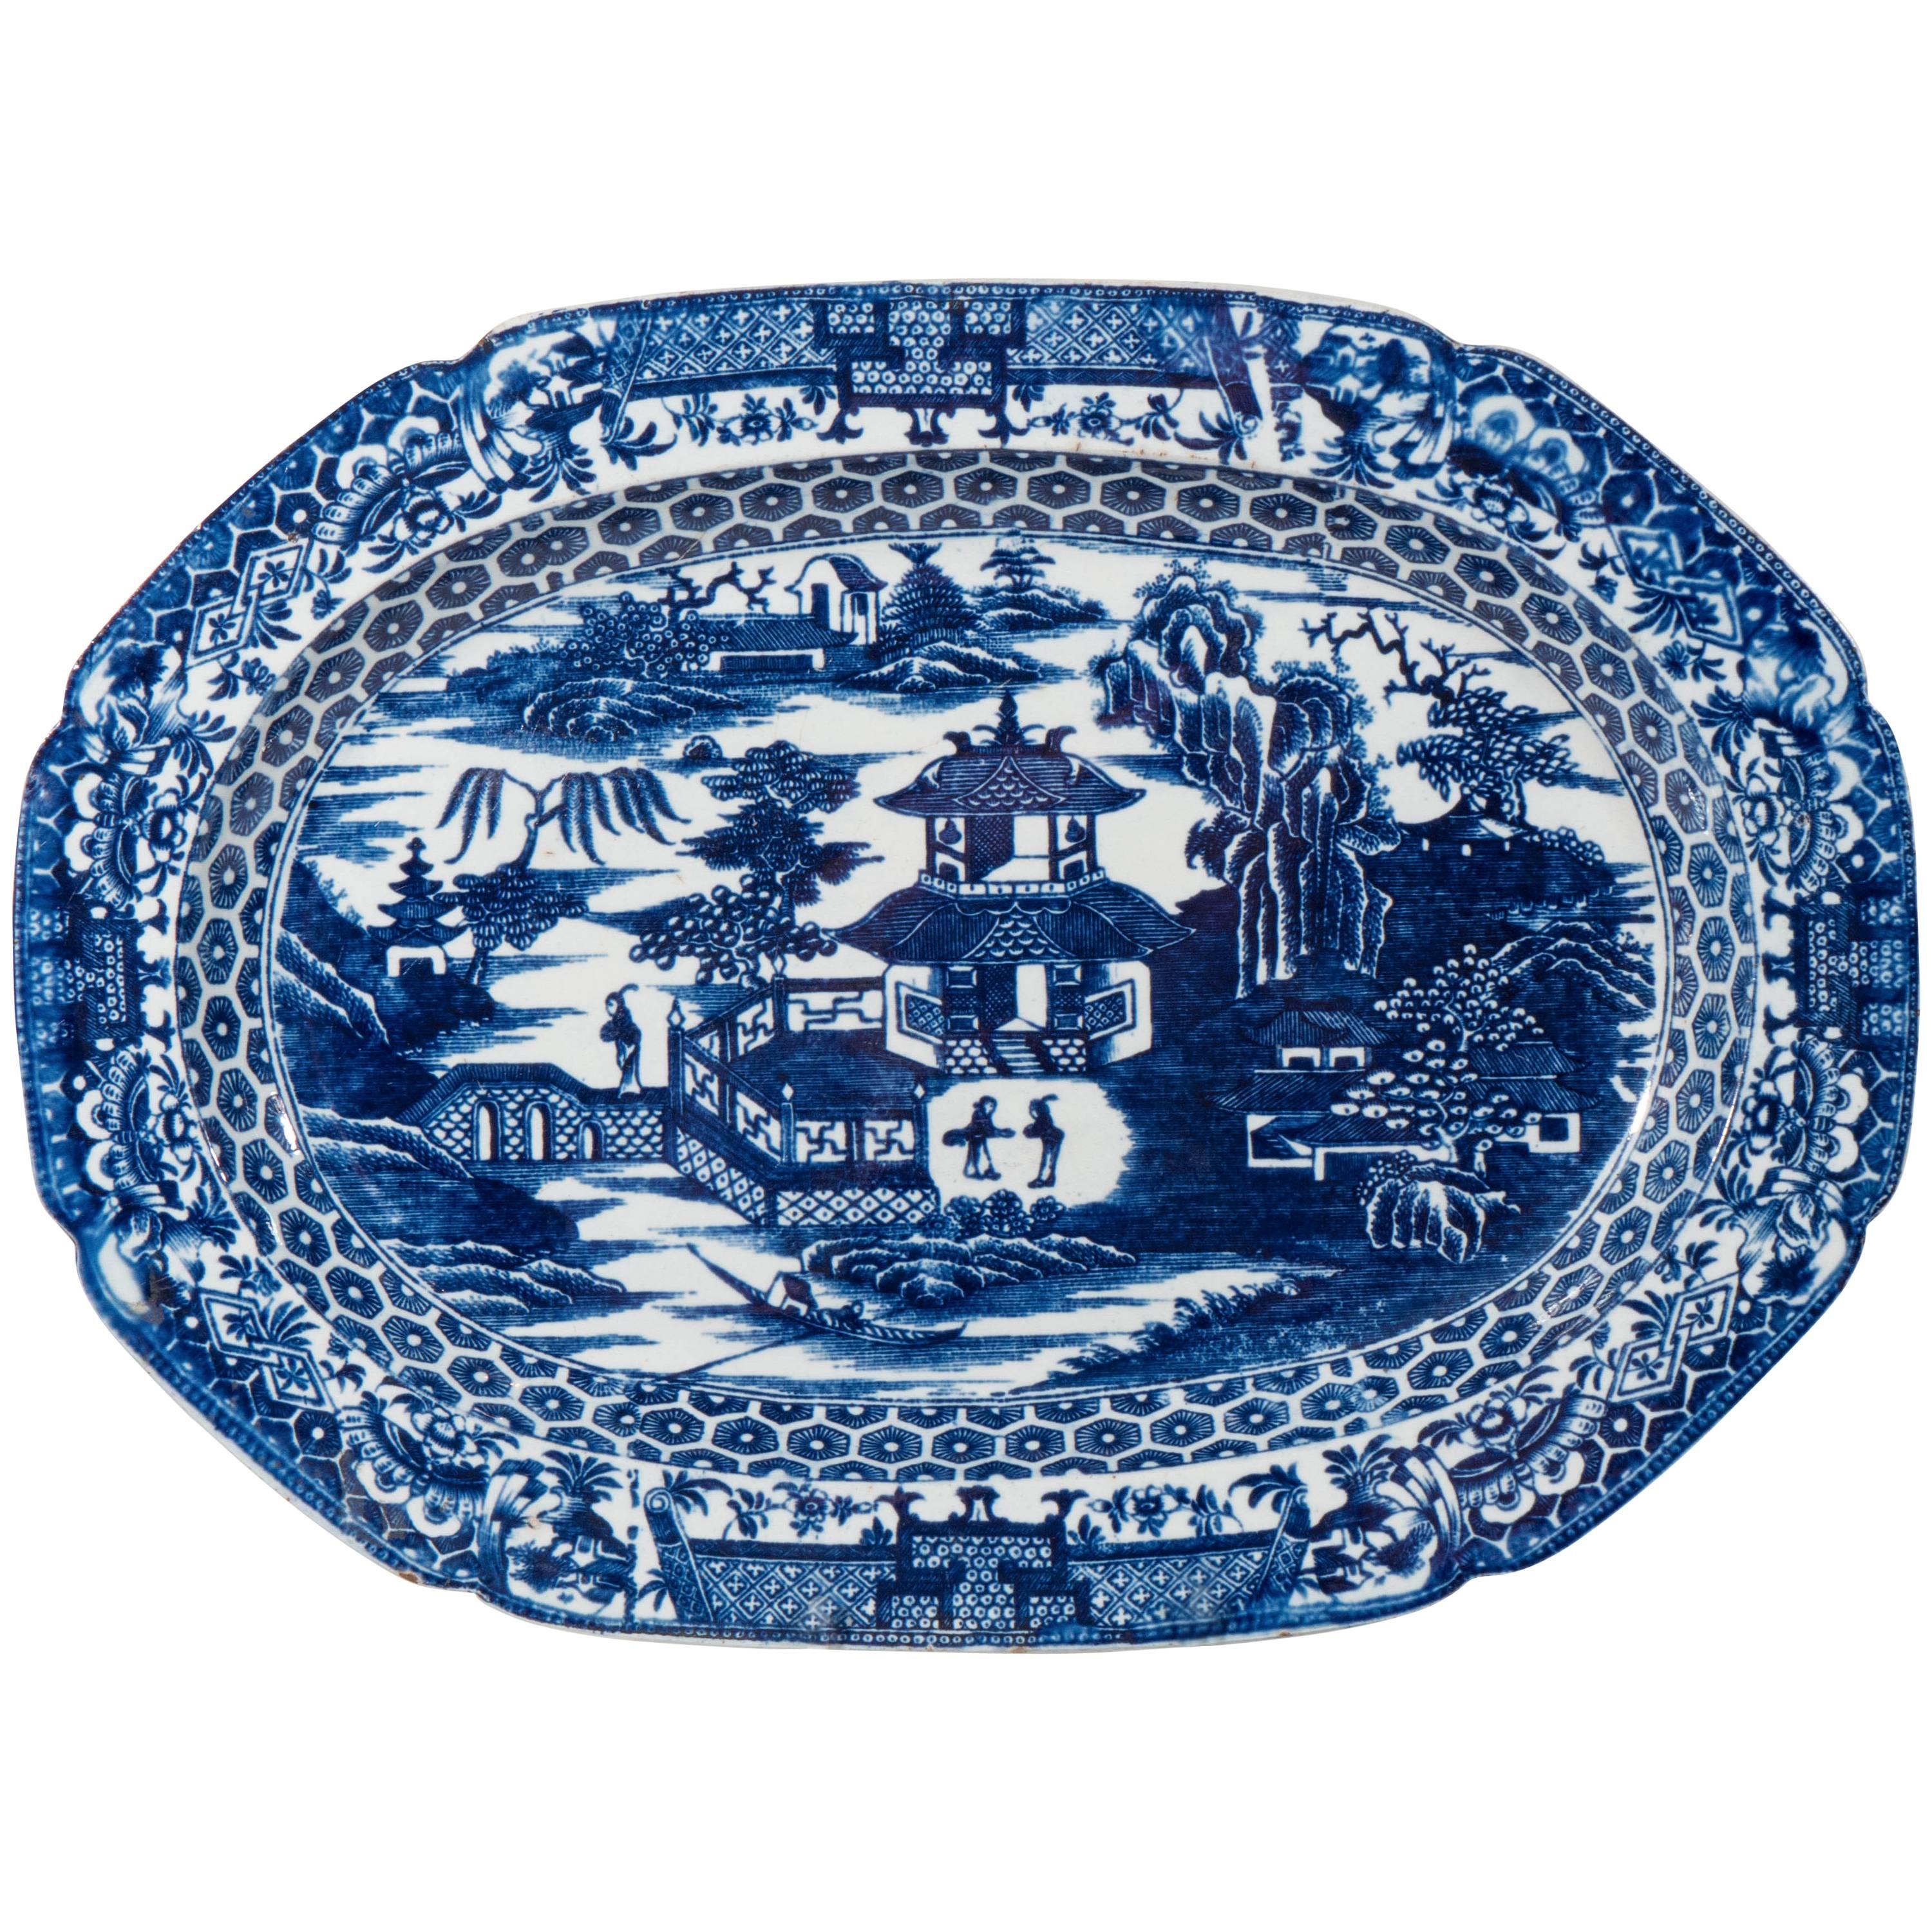 Late 18th Century English Blue and White Platter with the "Willow" Pattern